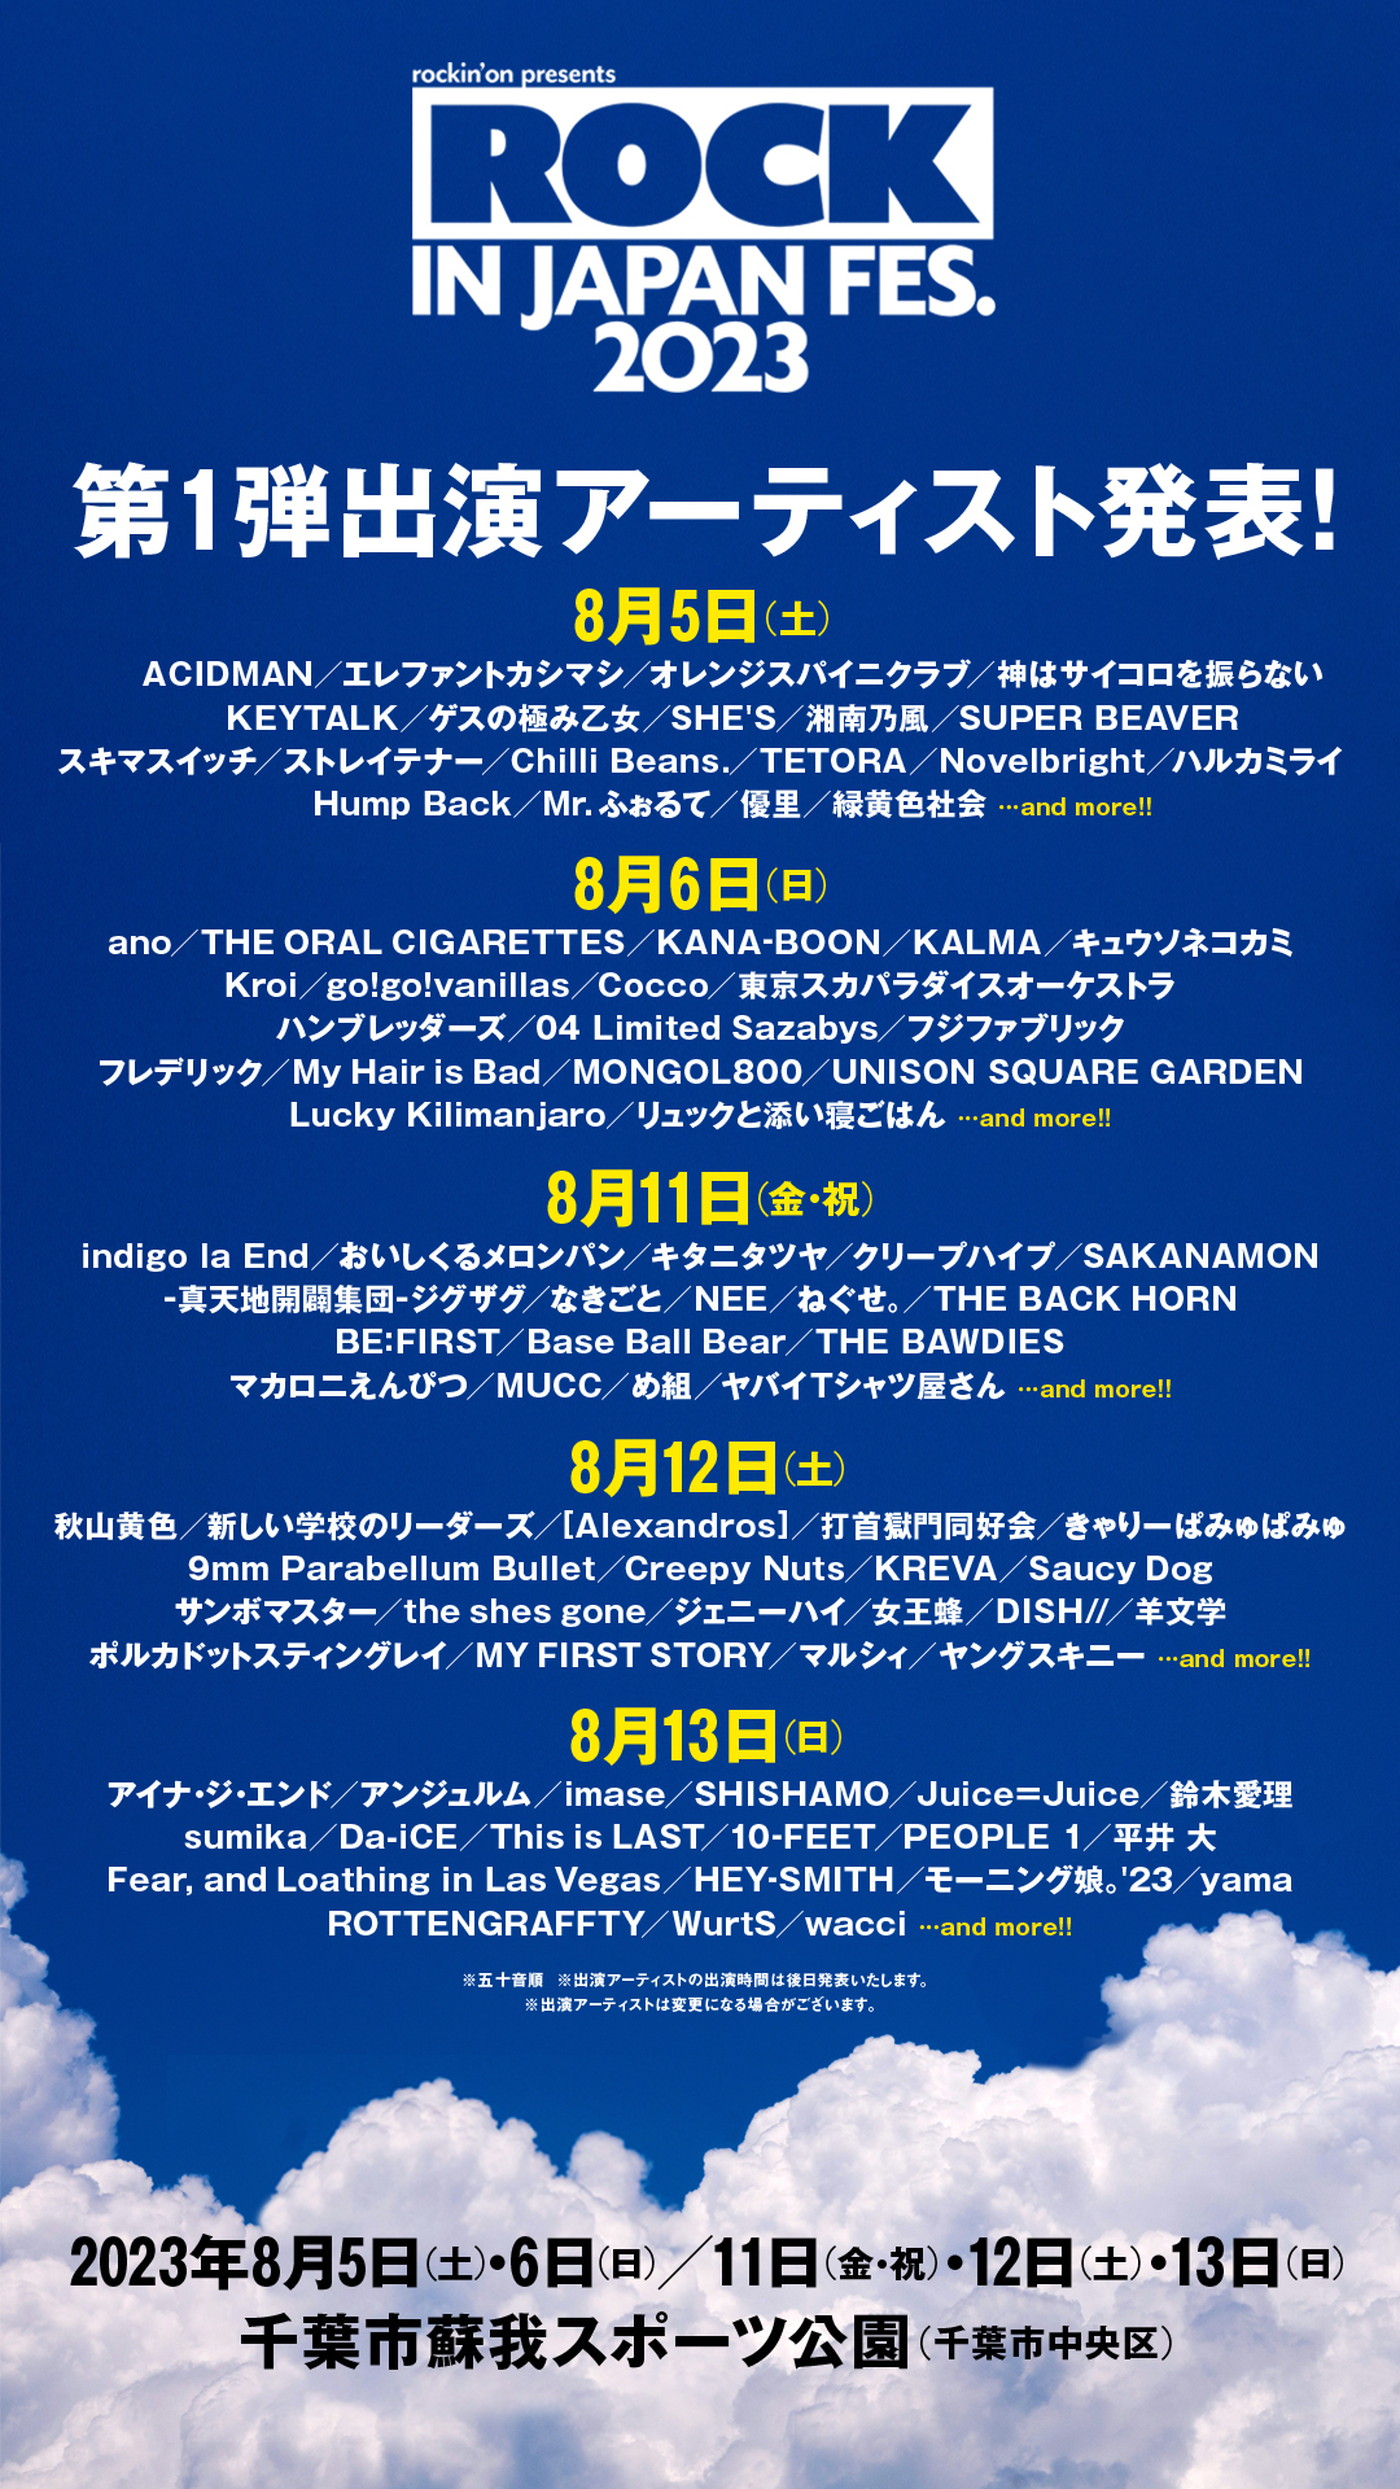 『ROCK IN JAPAN FESTIVAL 2023』第1弾出演アーティスト92組が決定！ チケット第1次抽選先行受付開始